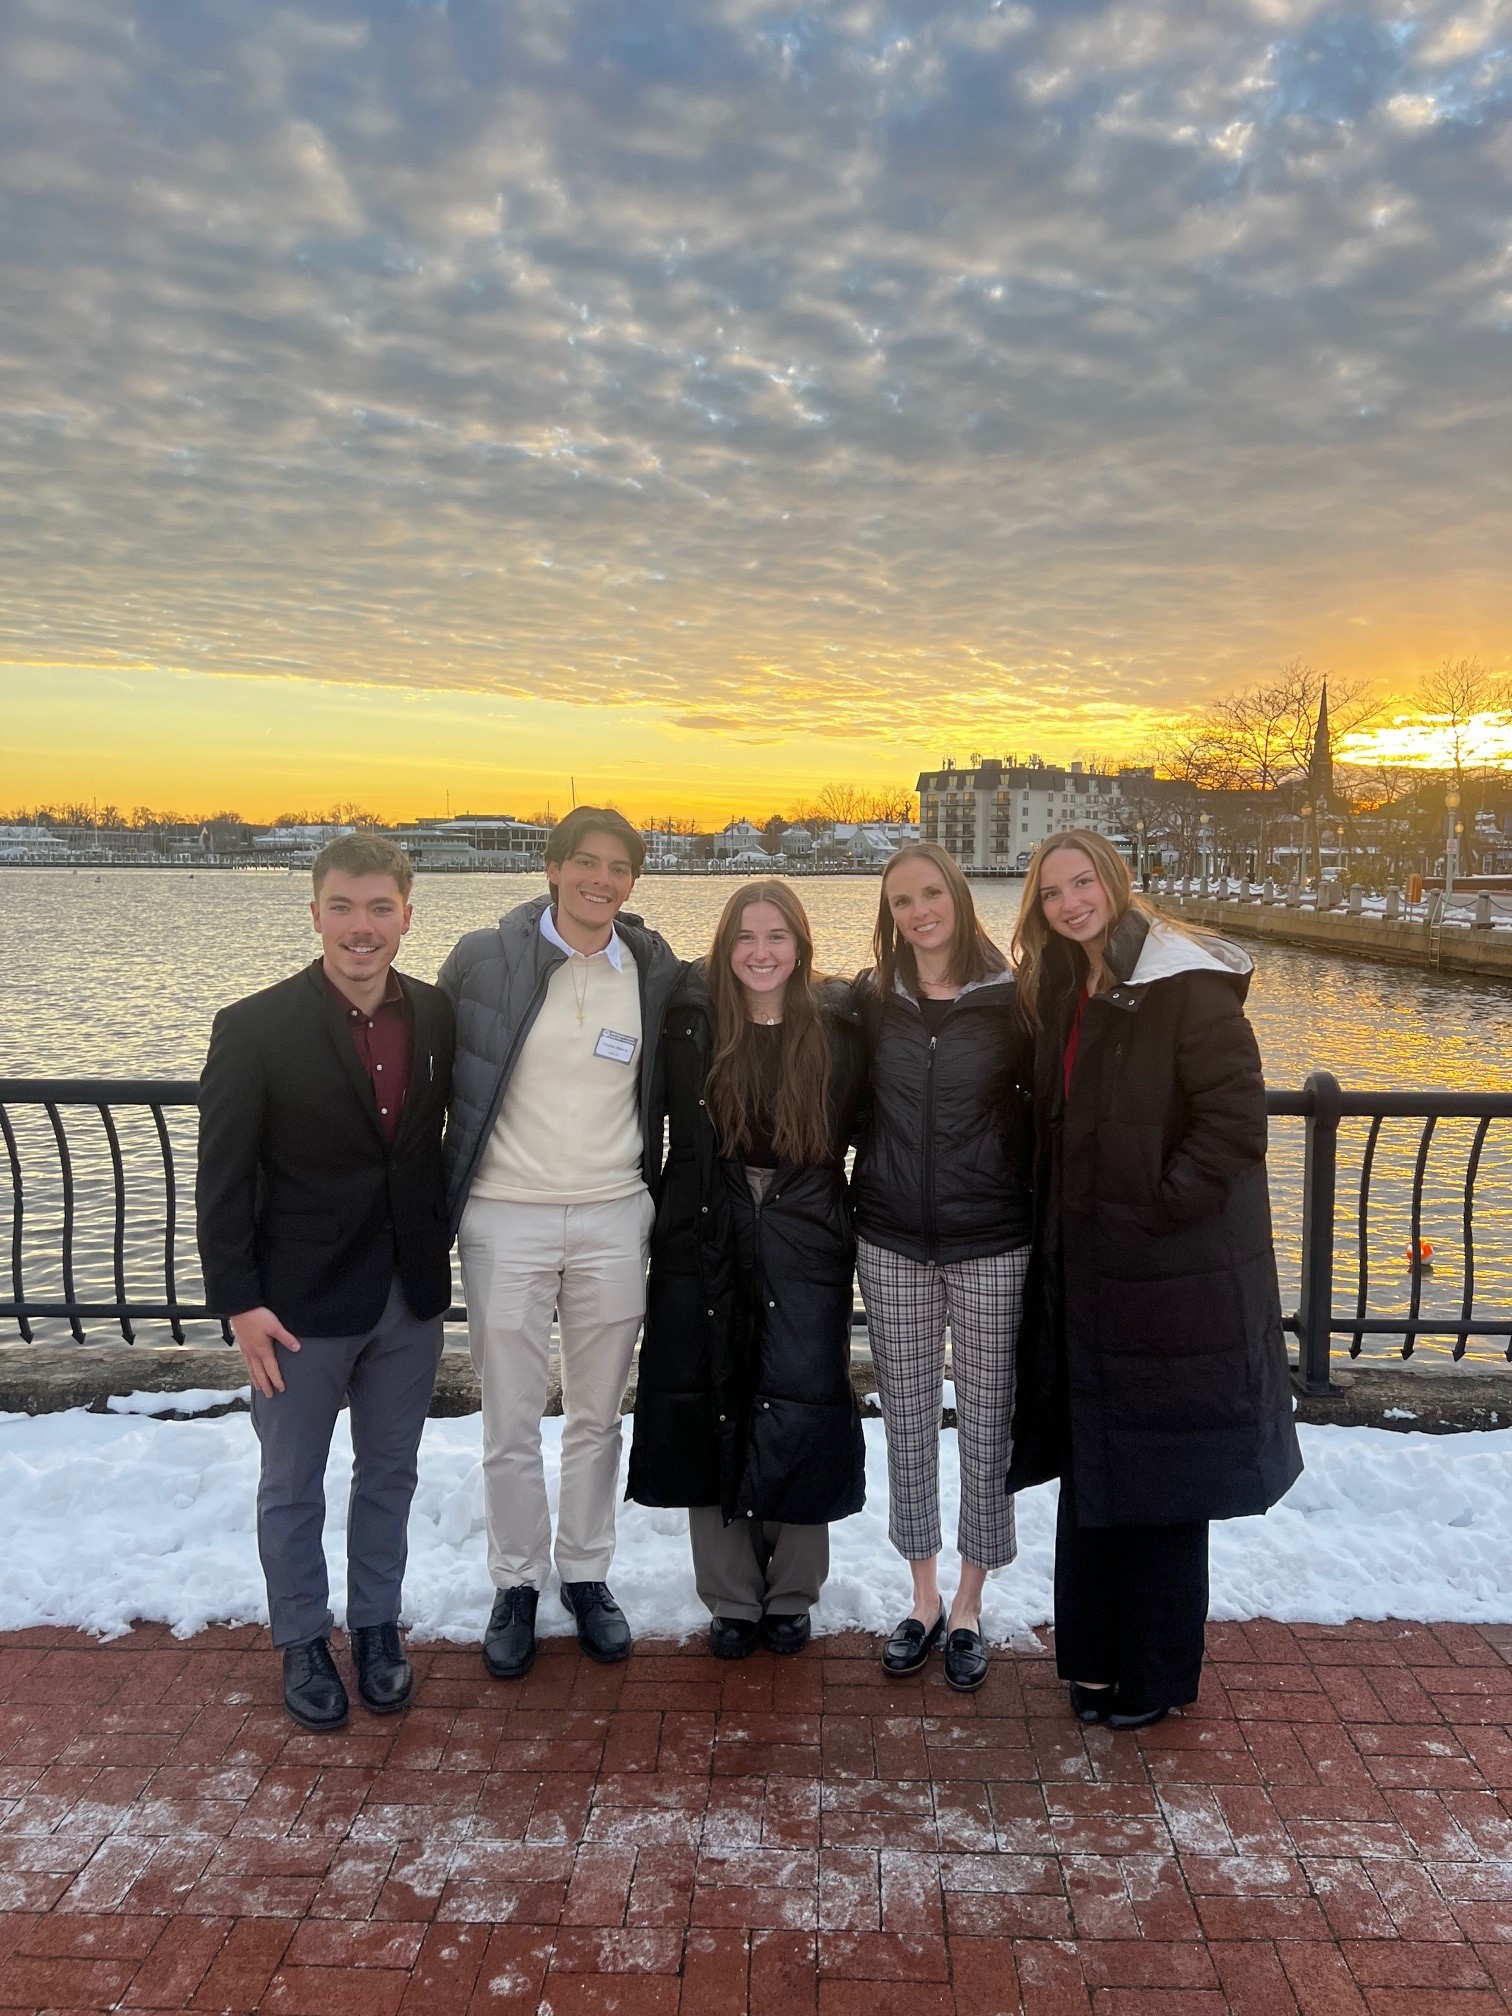 Four business majors attended the U.S. Naval Academy Leadership Conference in Annapolis, Maryland, including Deric Goldenstein, Nikolas Mainieri Mancio, Avery Plessel and Grace Timm, pictured with Rachel Wesley, Assistant Director of Business Advising and Student Engagement.